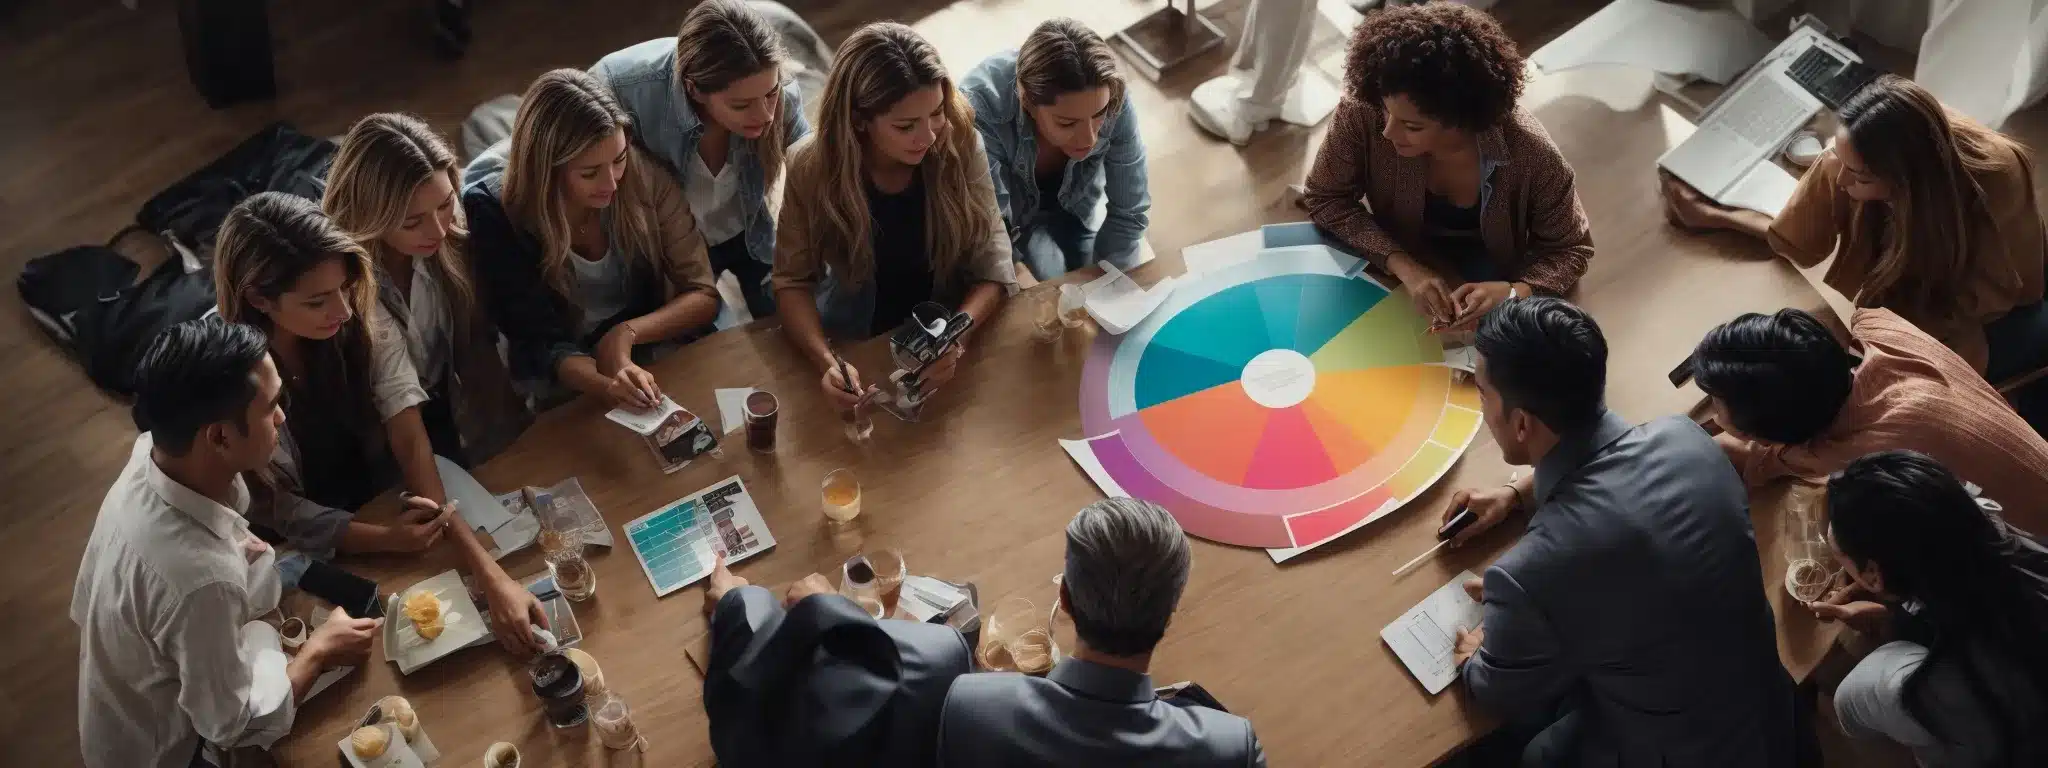 A Group Of Marketers Gathered Around A Table, Brainstorming Over A Vibrant Market Segmentation Chart.